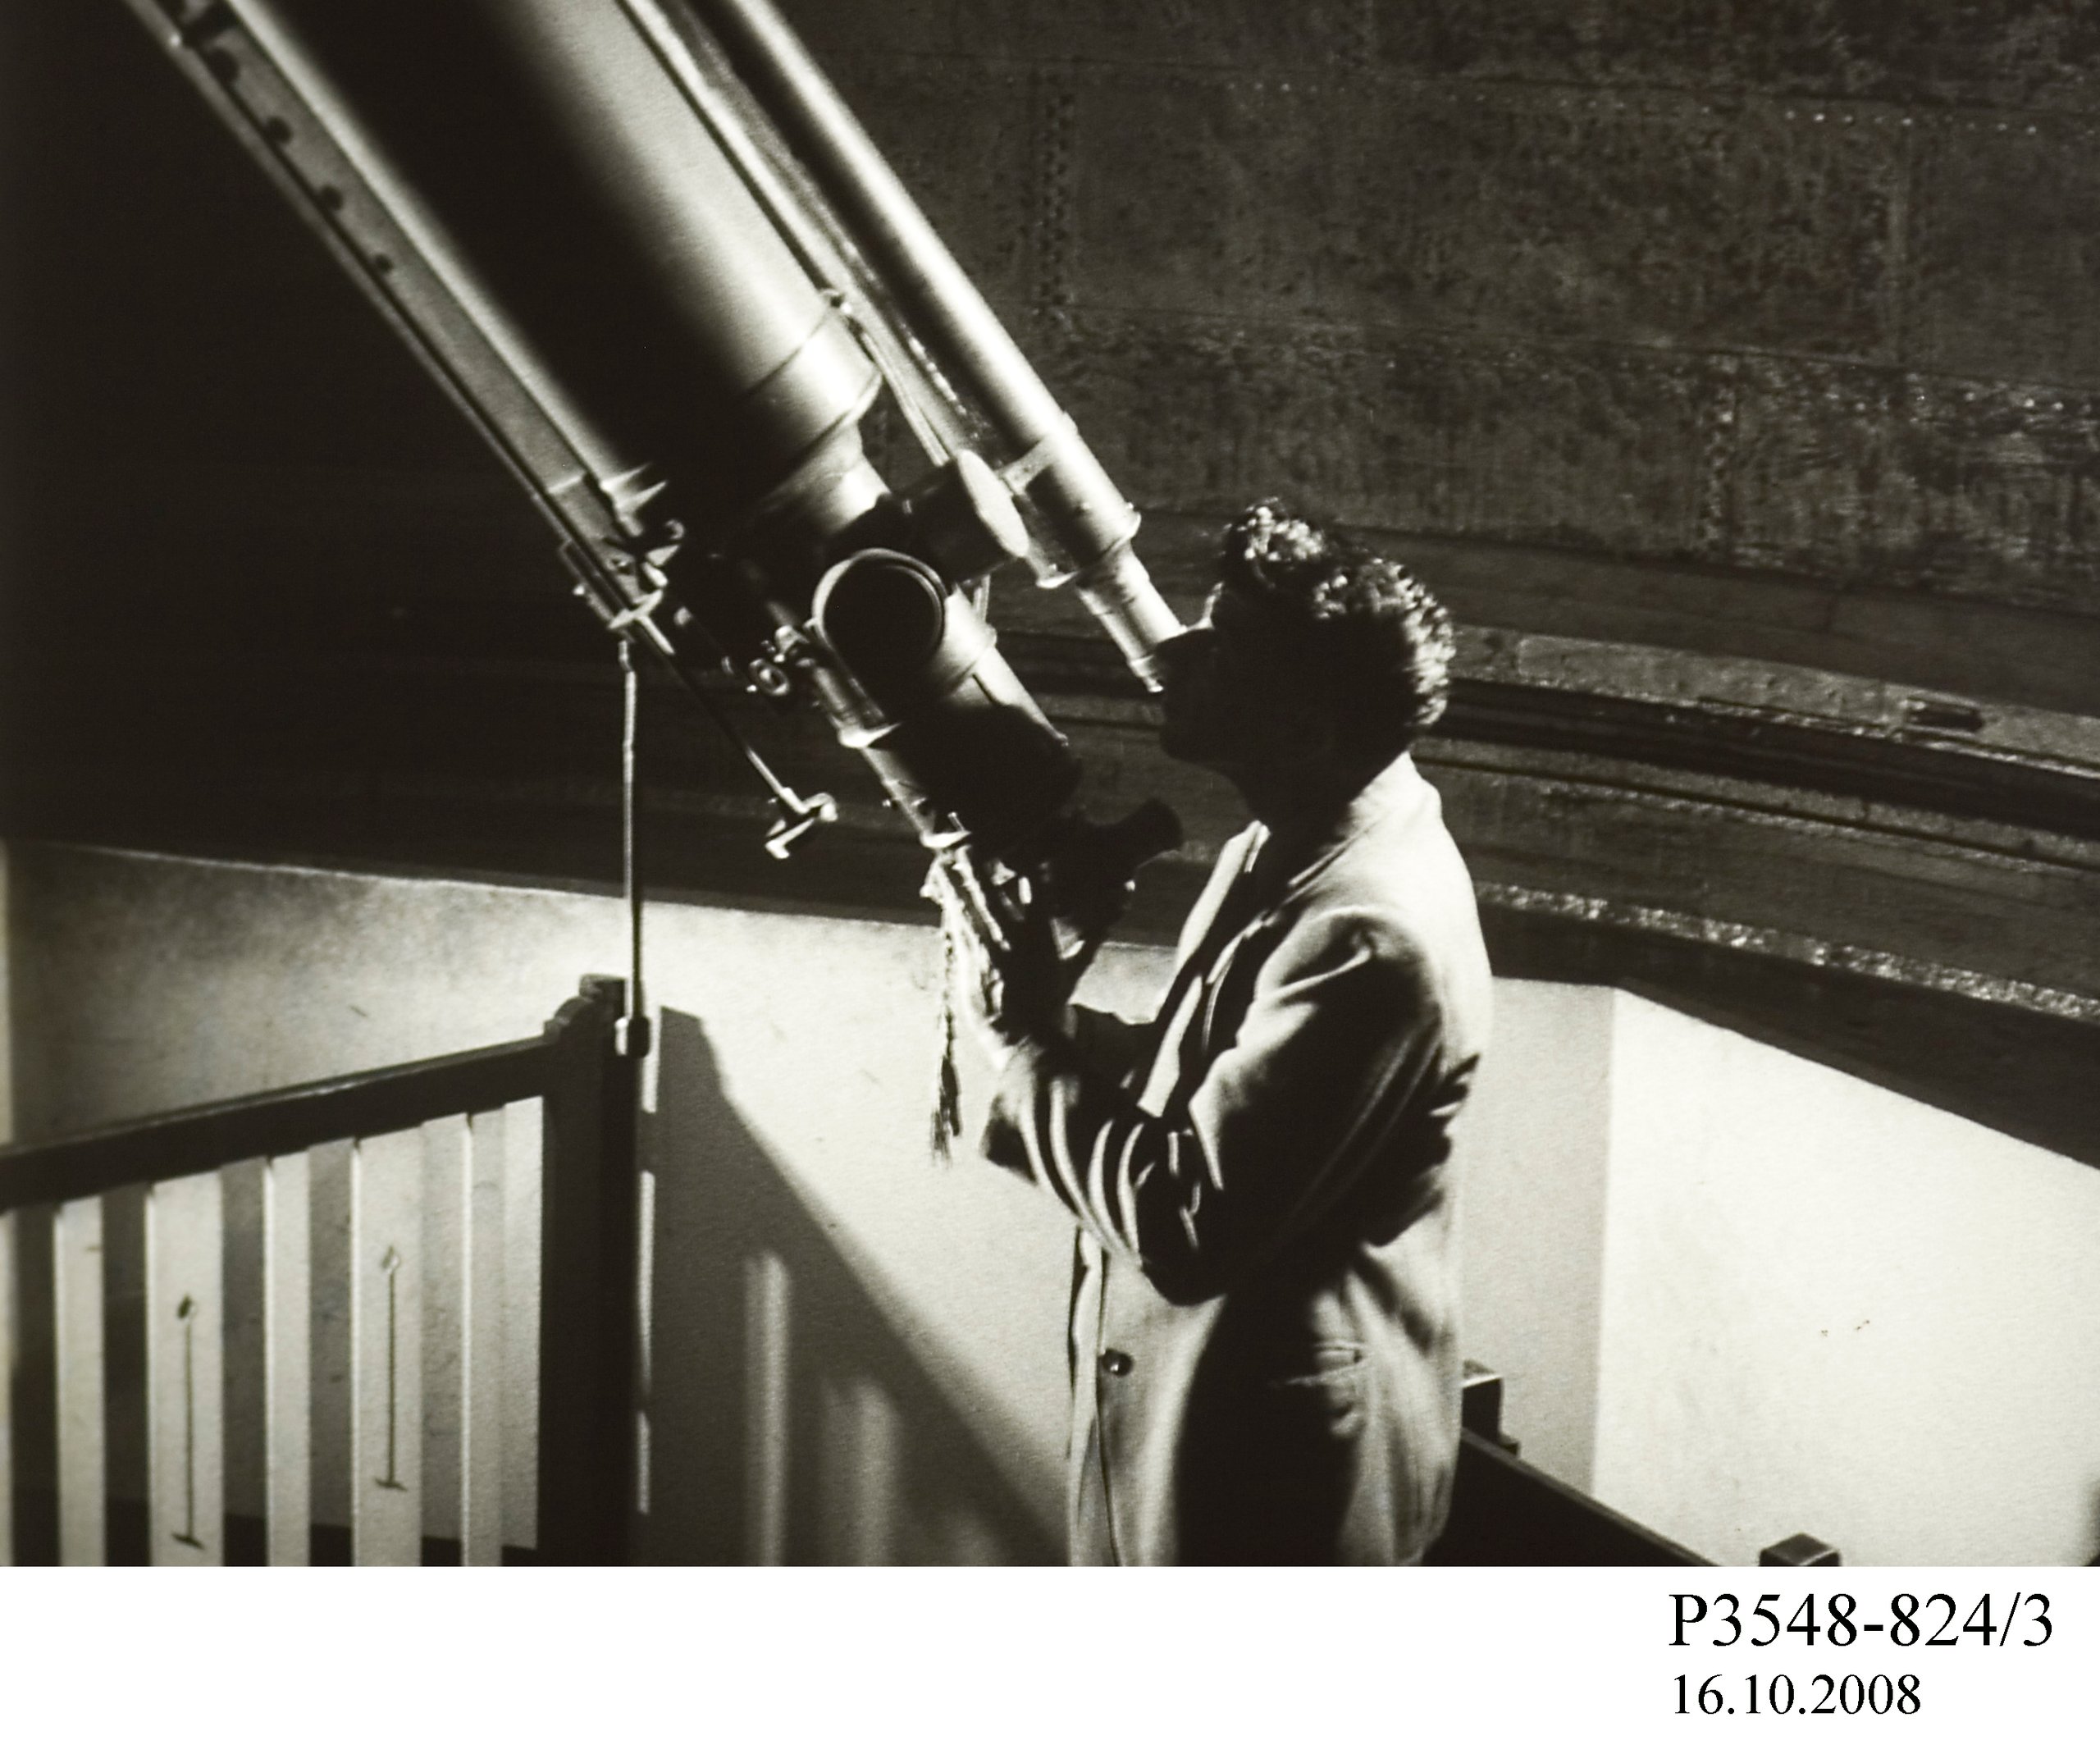 Film strip showing a man looking into a telescope